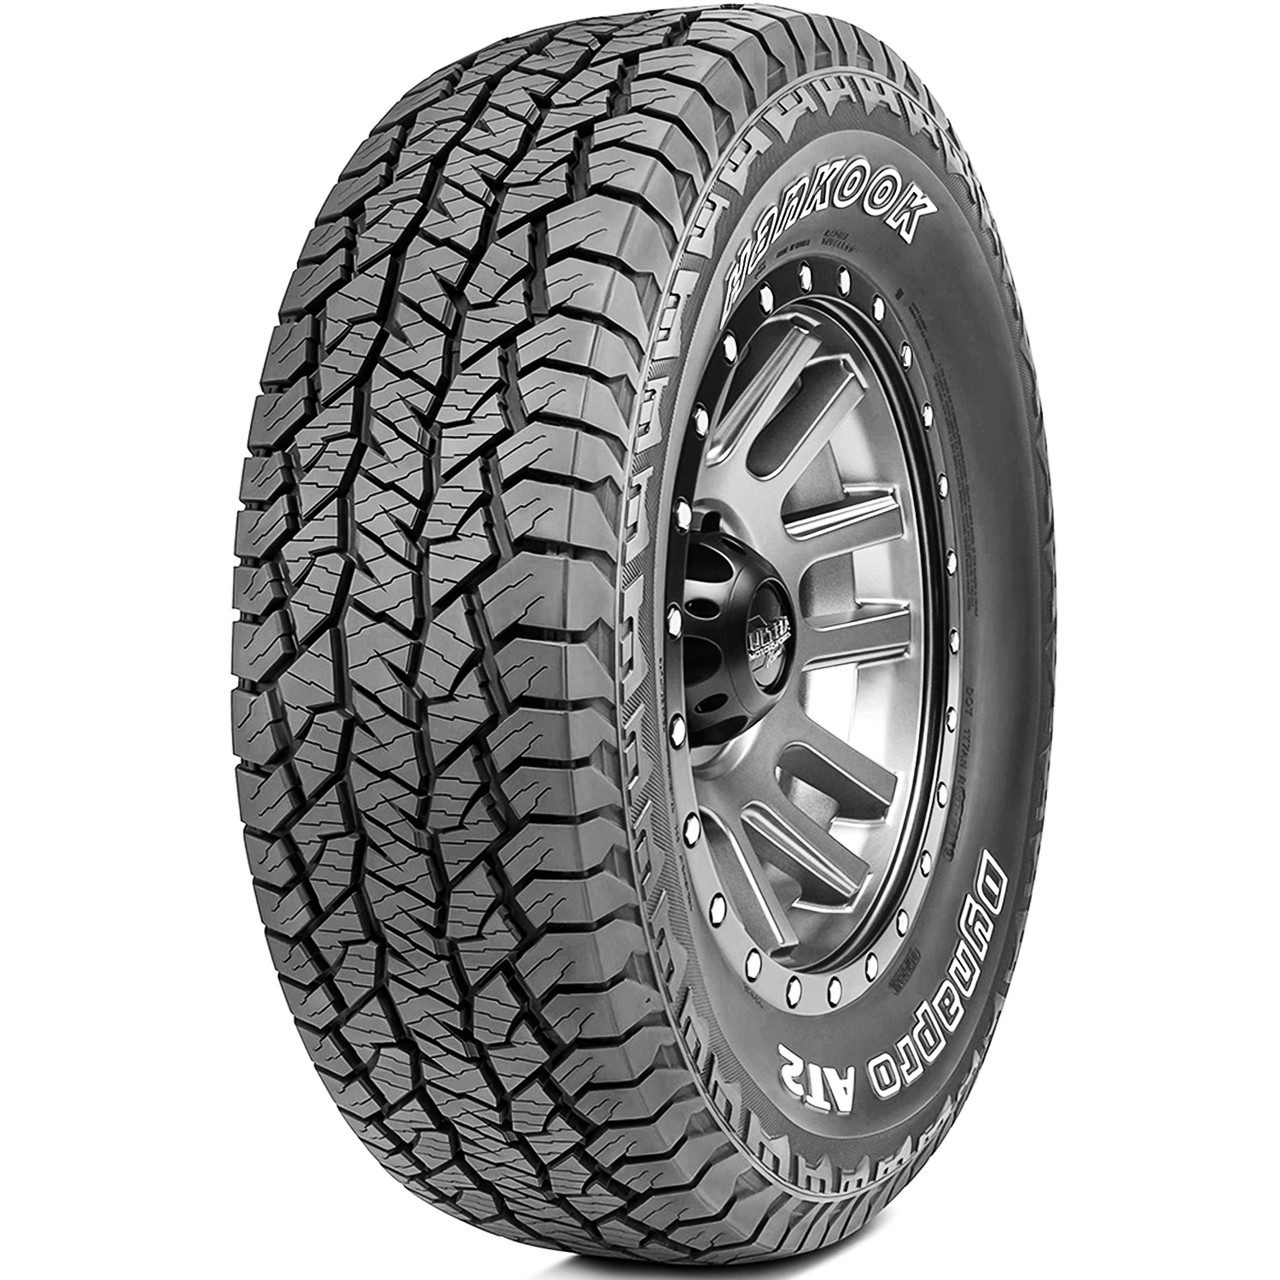 Photos - Motorcycle Tyre Hankook Dynapro AT2 235/75R16, All Season, All Terrain tires. 